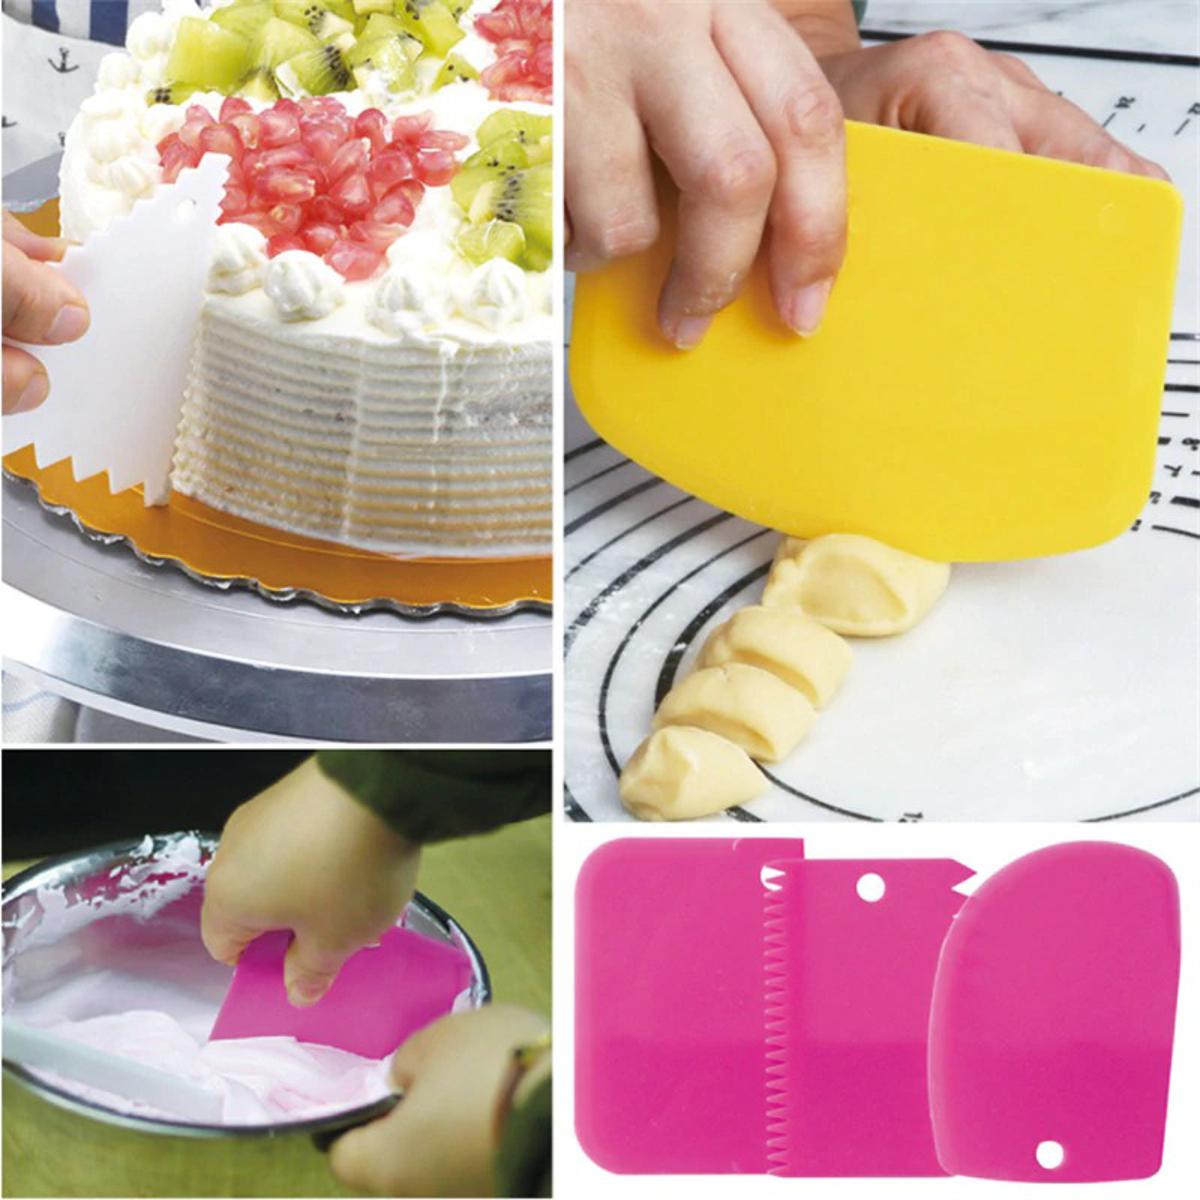 Icing Nozzles - Buy Icing Nozzles Online at Best Prices In India |  Flipkart.com